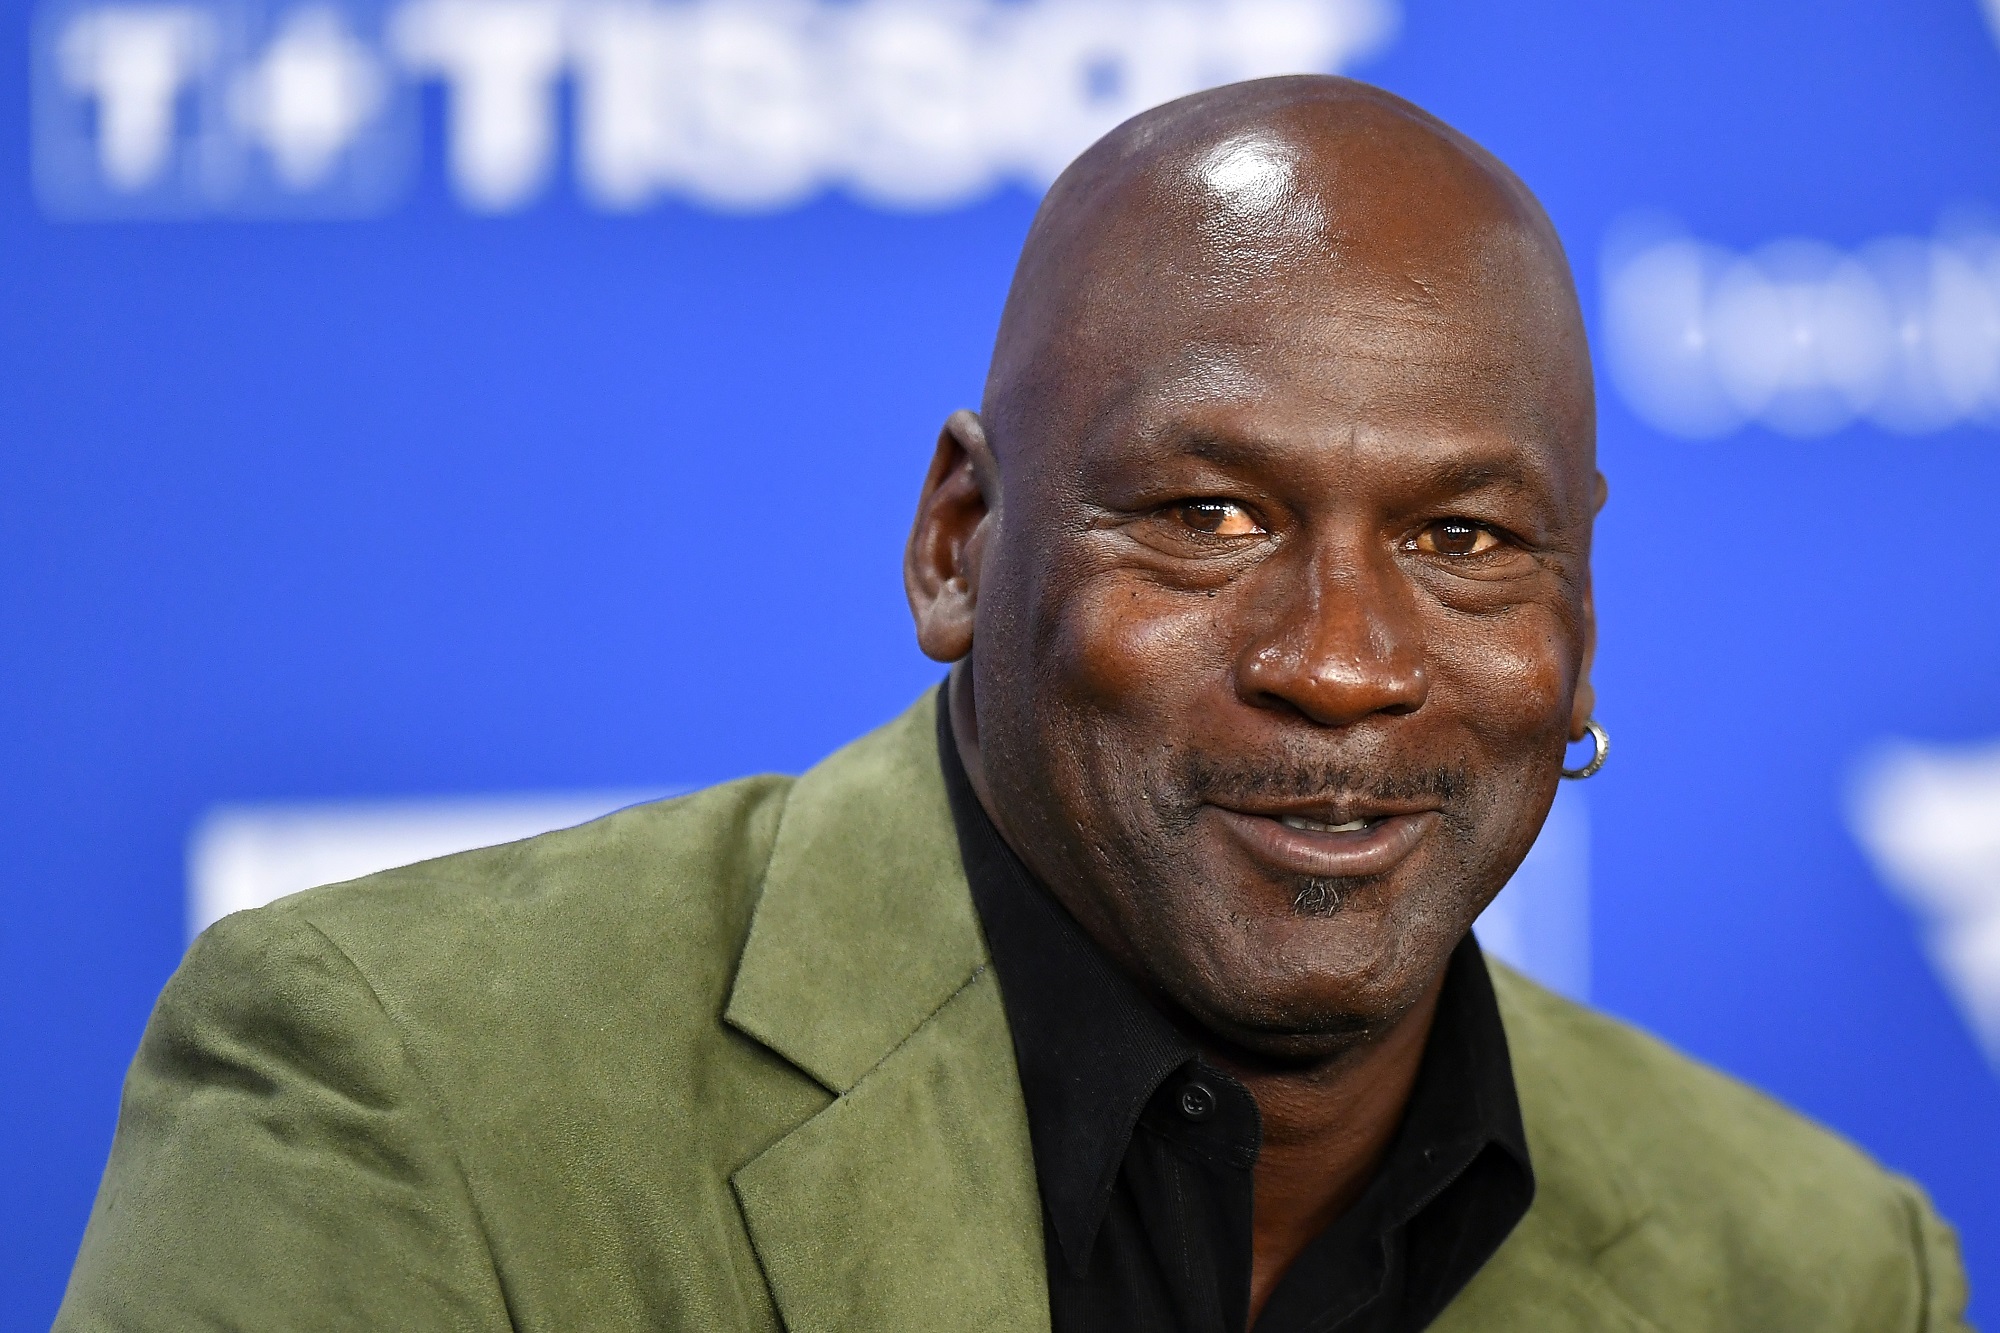 Michael Jordan attends a press conference on January 24, 2020 in Paris, France.